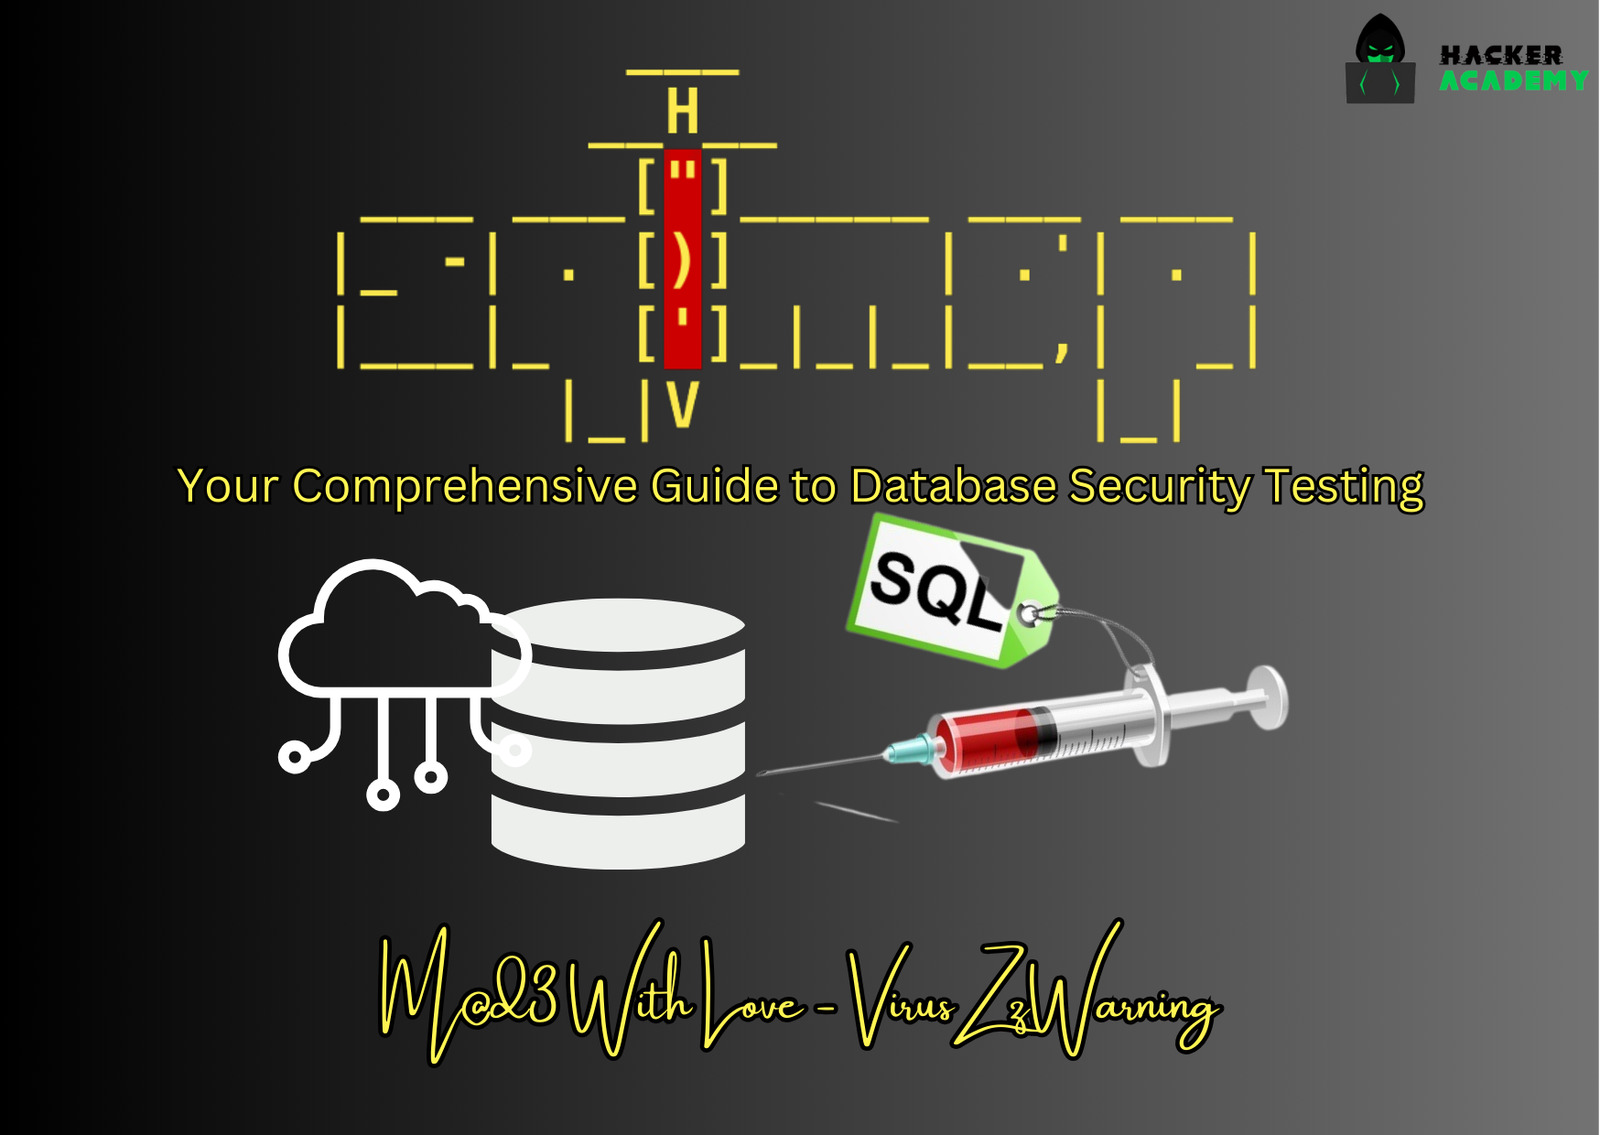 SQLMap: Your Comprehensive Guide to Database Security Testing